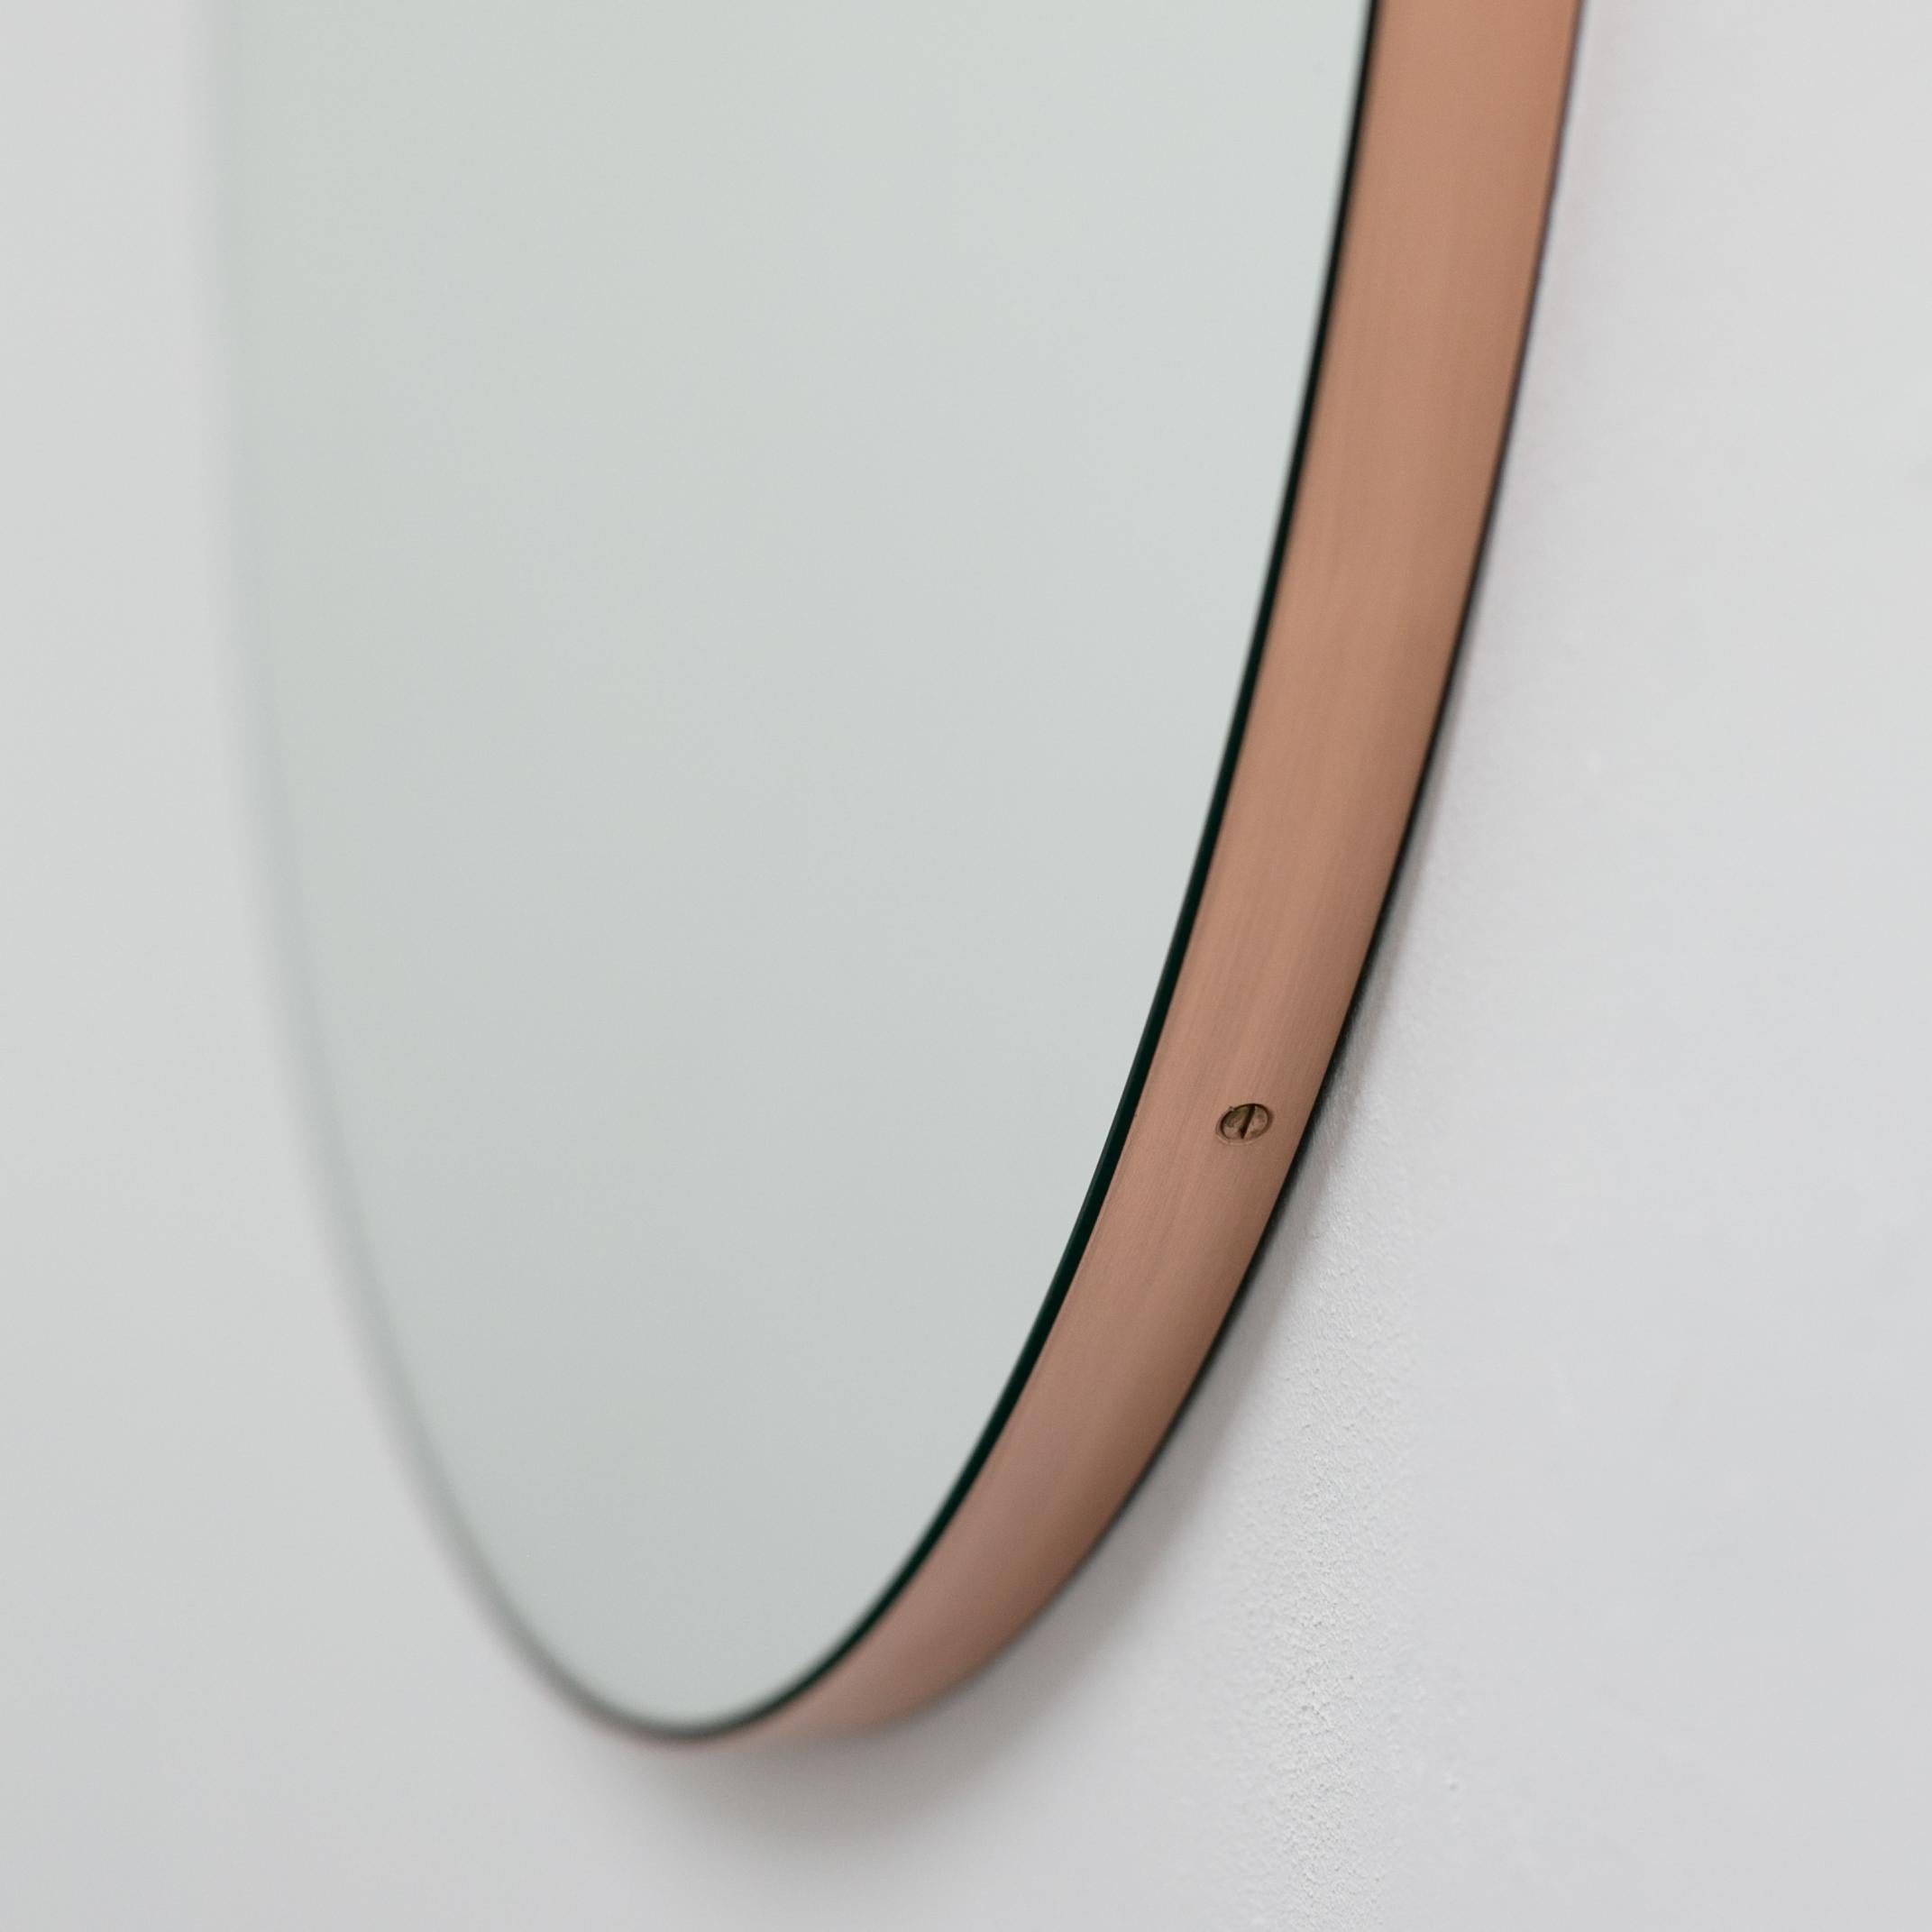 Orbis Round Contemporary Mirror with Copper Frame, Medium For Sale 4